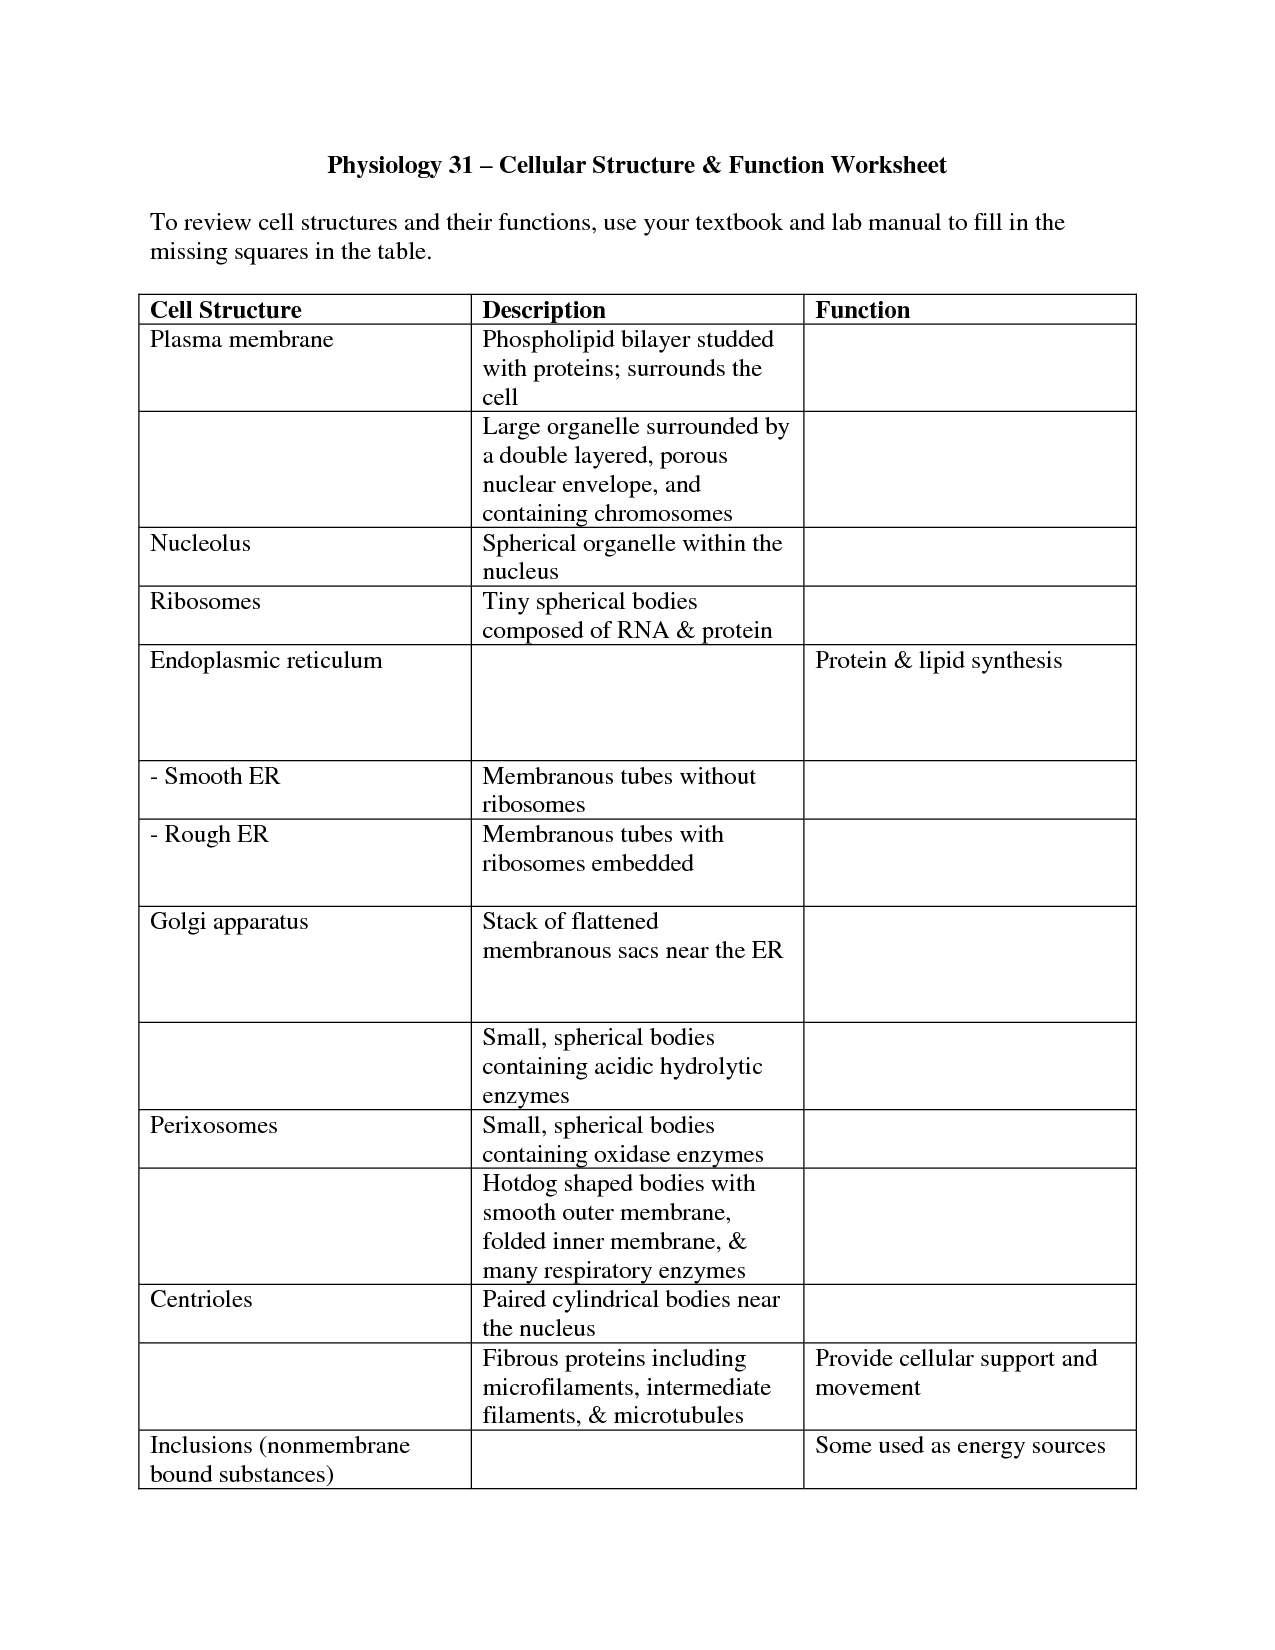 13-best-images-of-function-of-organelles-worksheet-cell-organelles-worksheet-answers-cell